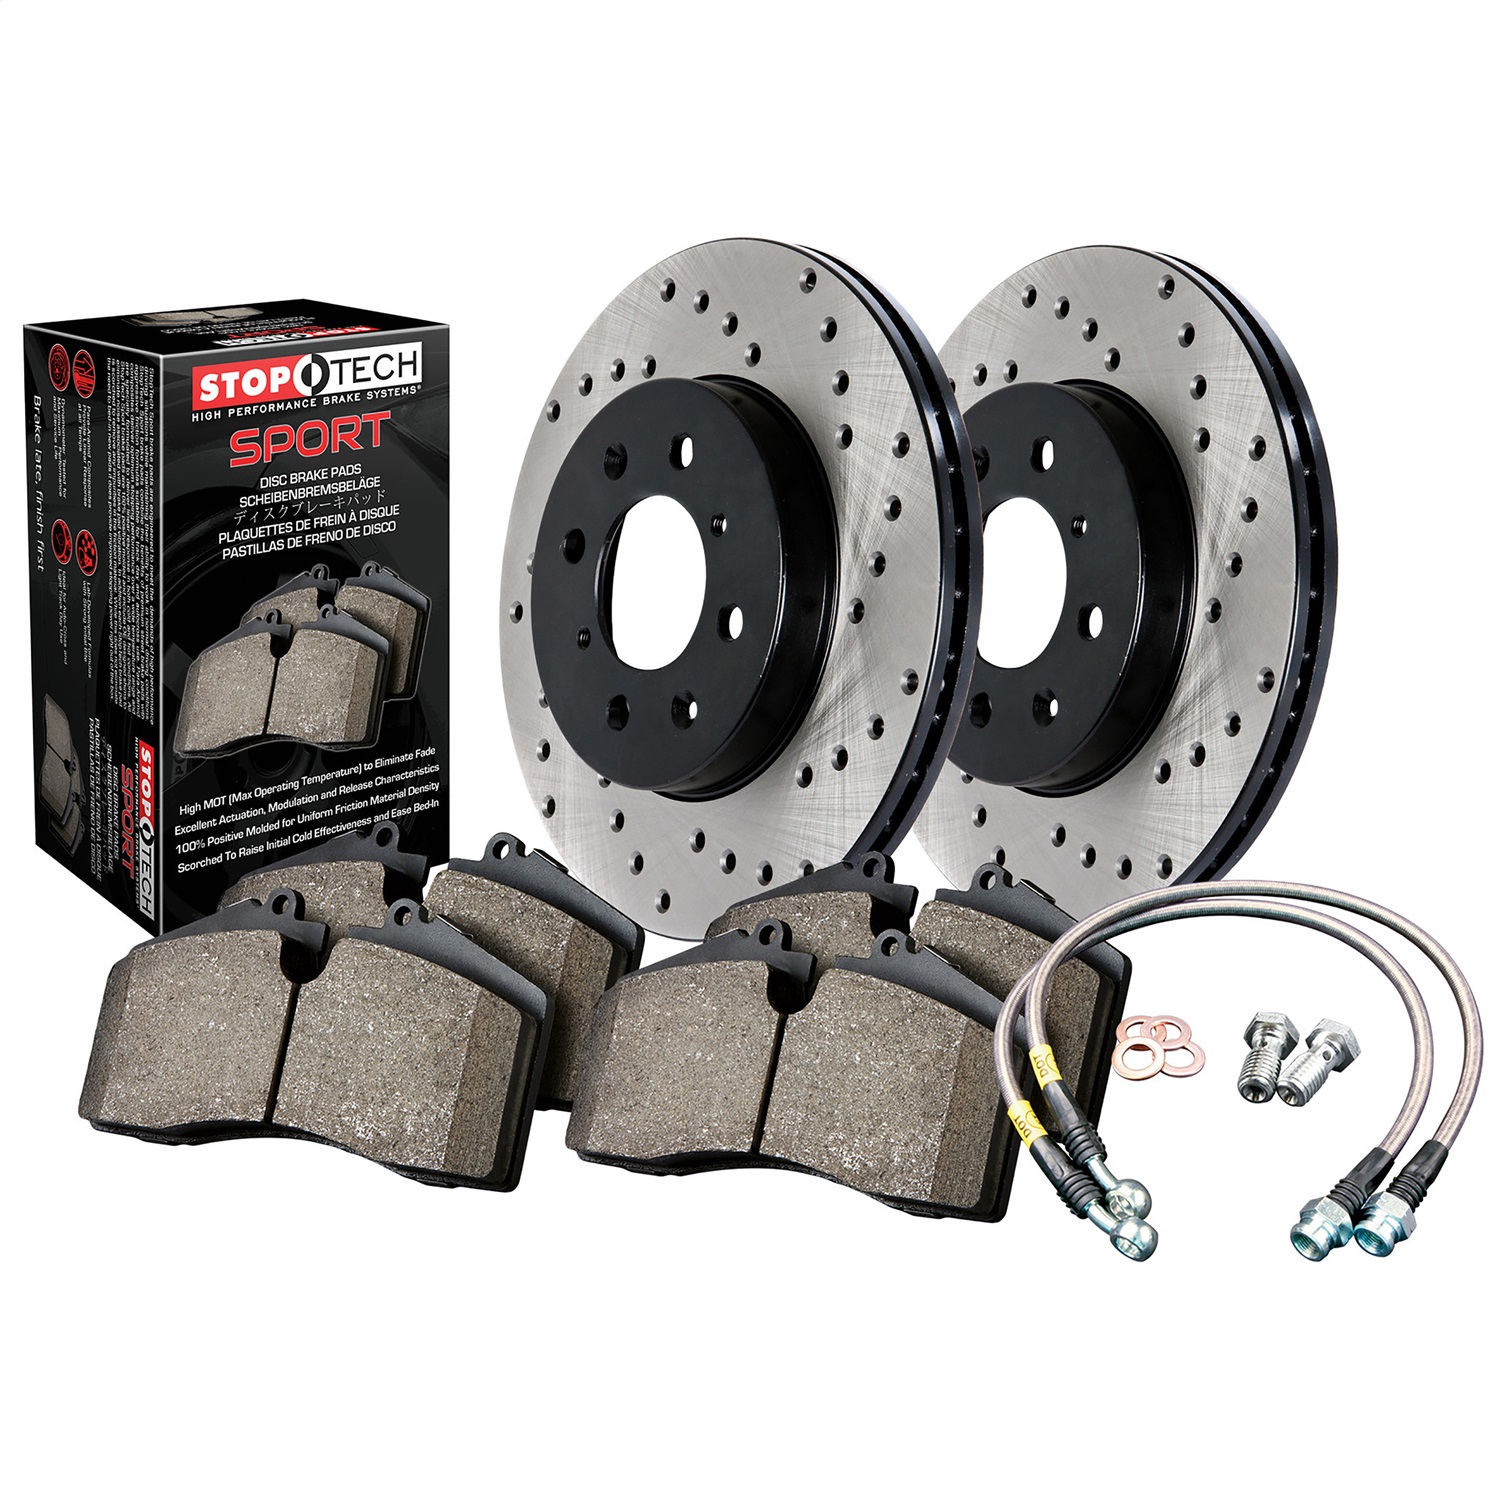 StopTech 979.61008F Sport Disc Brake Kit w/Cross-Drilled Rotor Fits 12-18 Focus